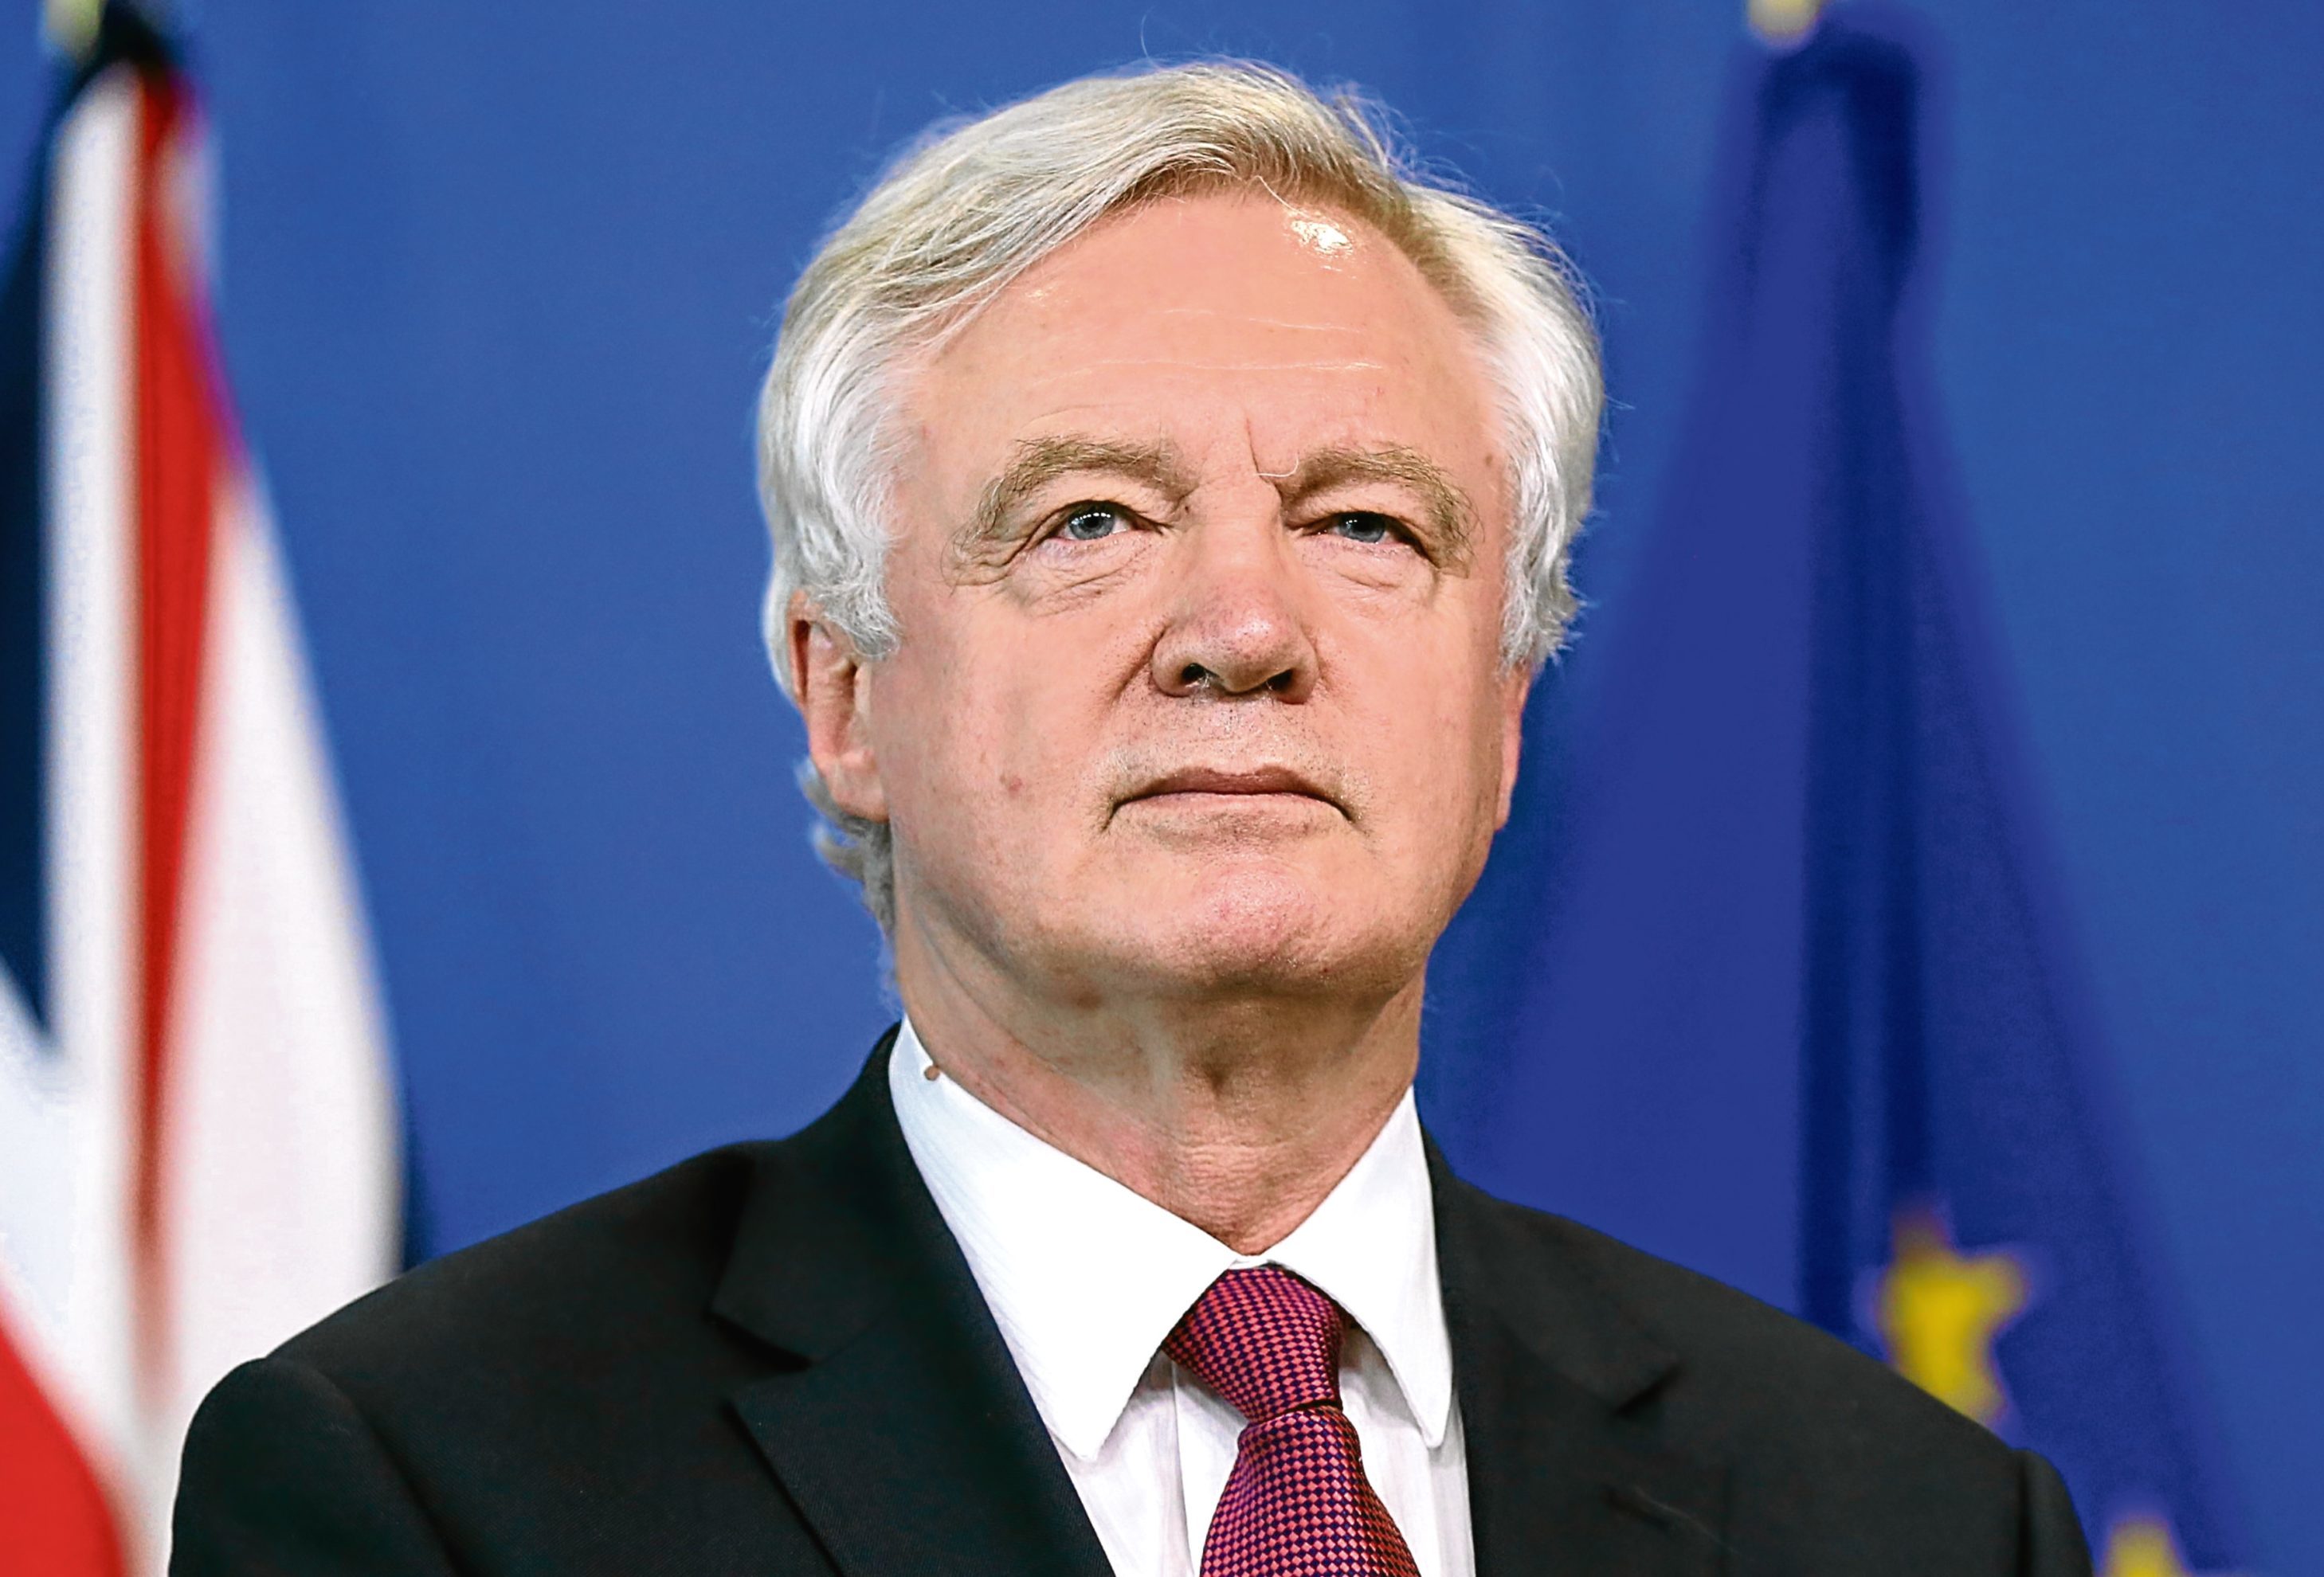 Secretary of State for Exiting the European Union, David Davisstart of Brexit negotiations in Brussels, Belgium, on (Dursun Aydemir/Anadolu Agency/Getty Images)